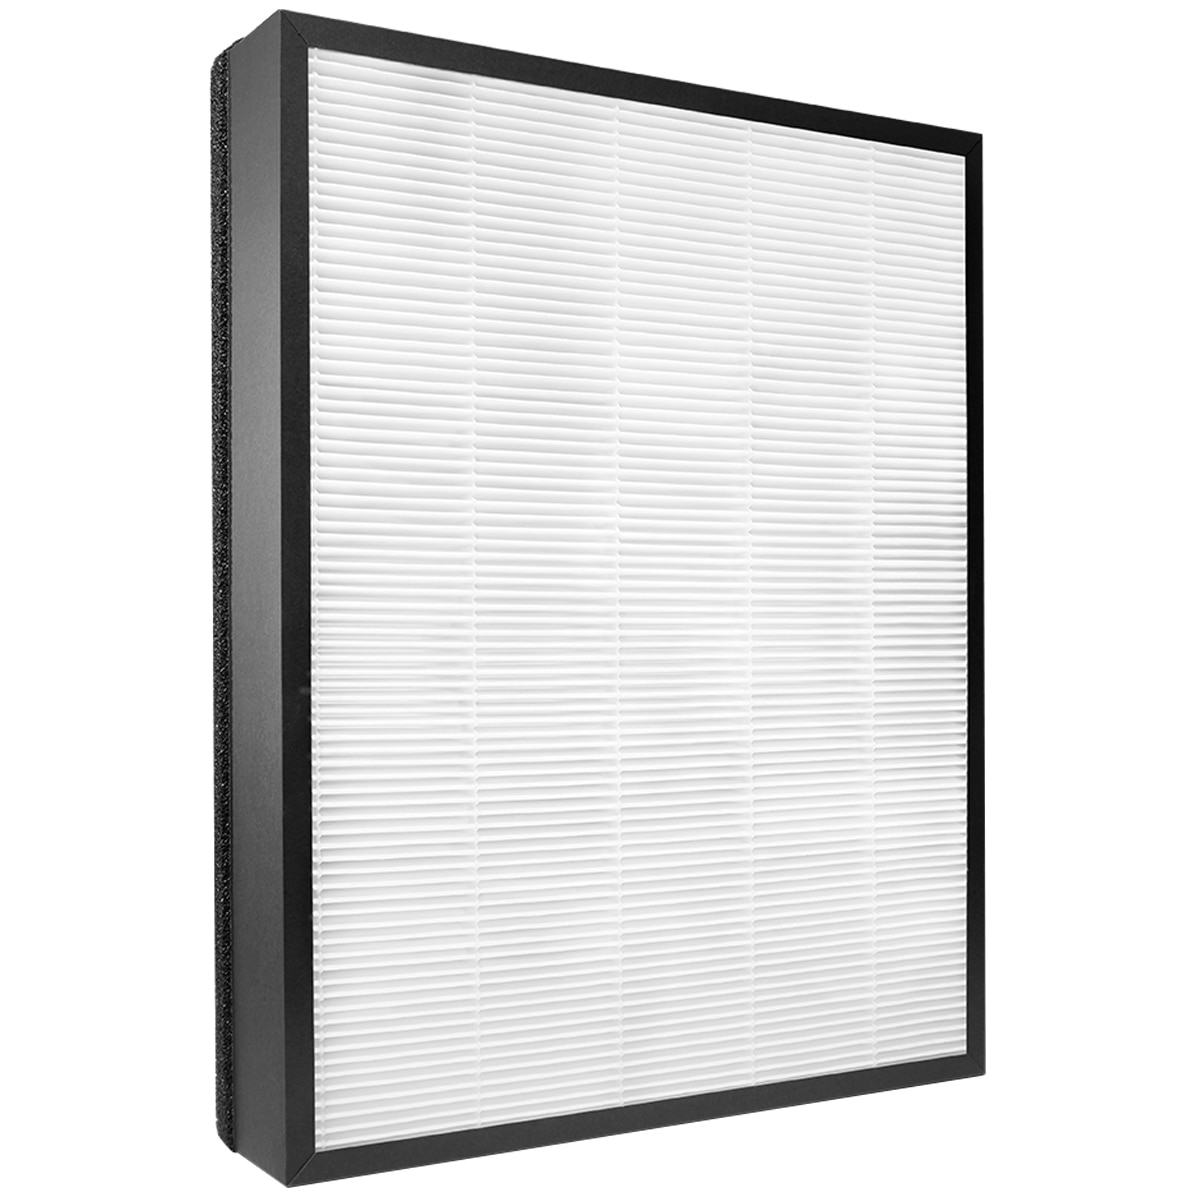 Philips NanoProtect HEPA Filter for Air Purifier Series 3000 - FY3433/10